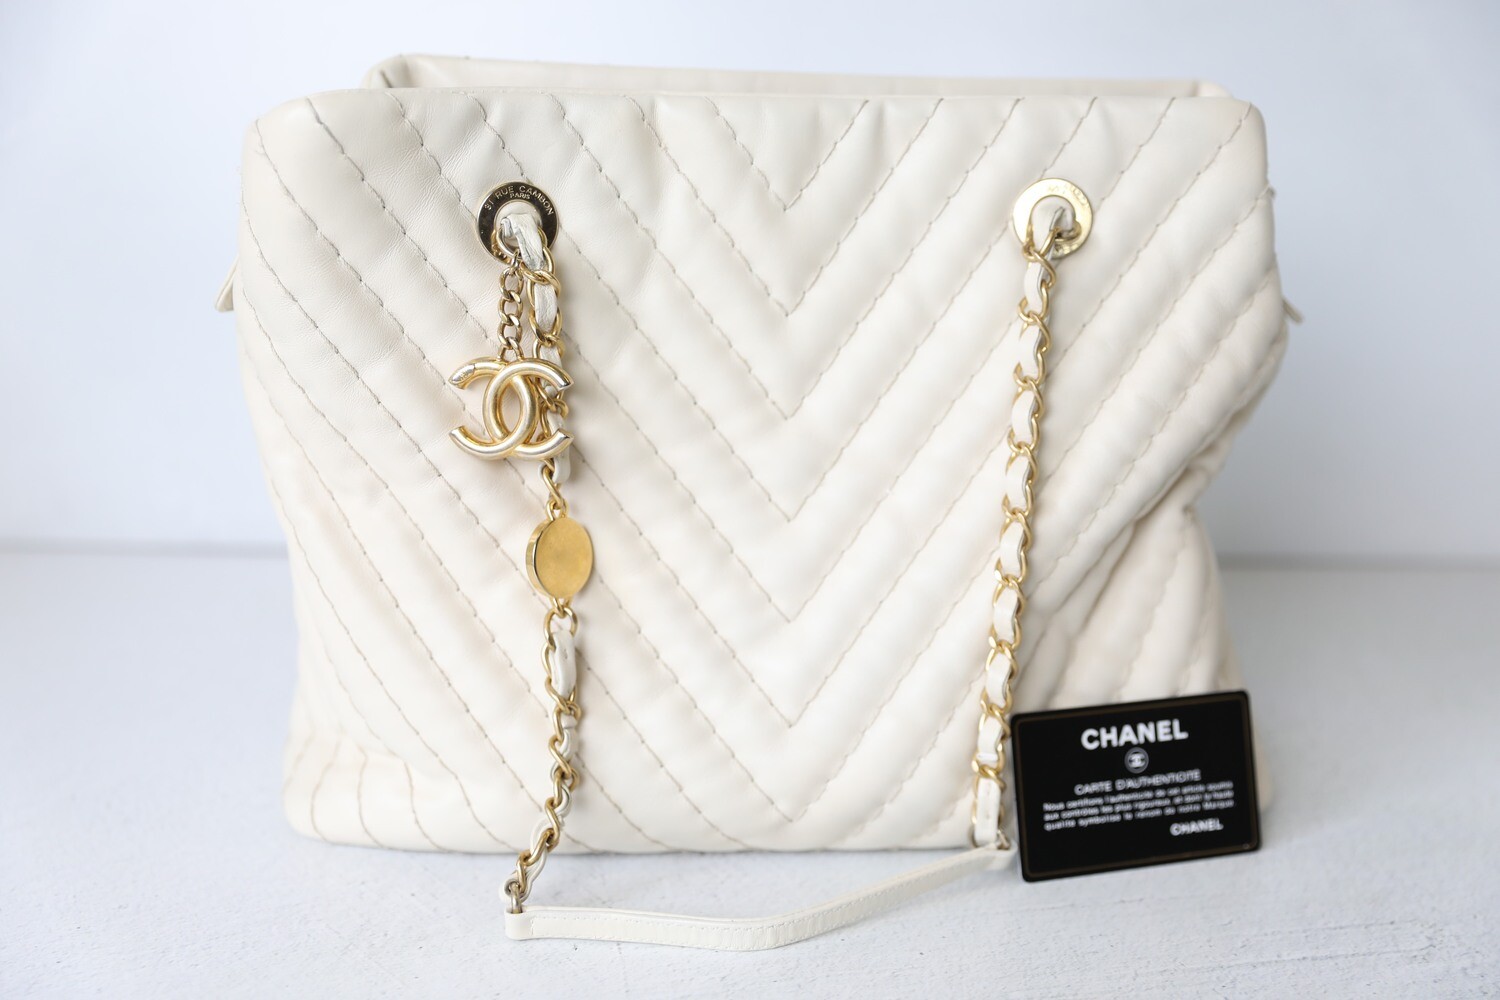 Chanel Shopping Tote, White Chevron with Gold Hardware, Preowned in Dustbag  WA001